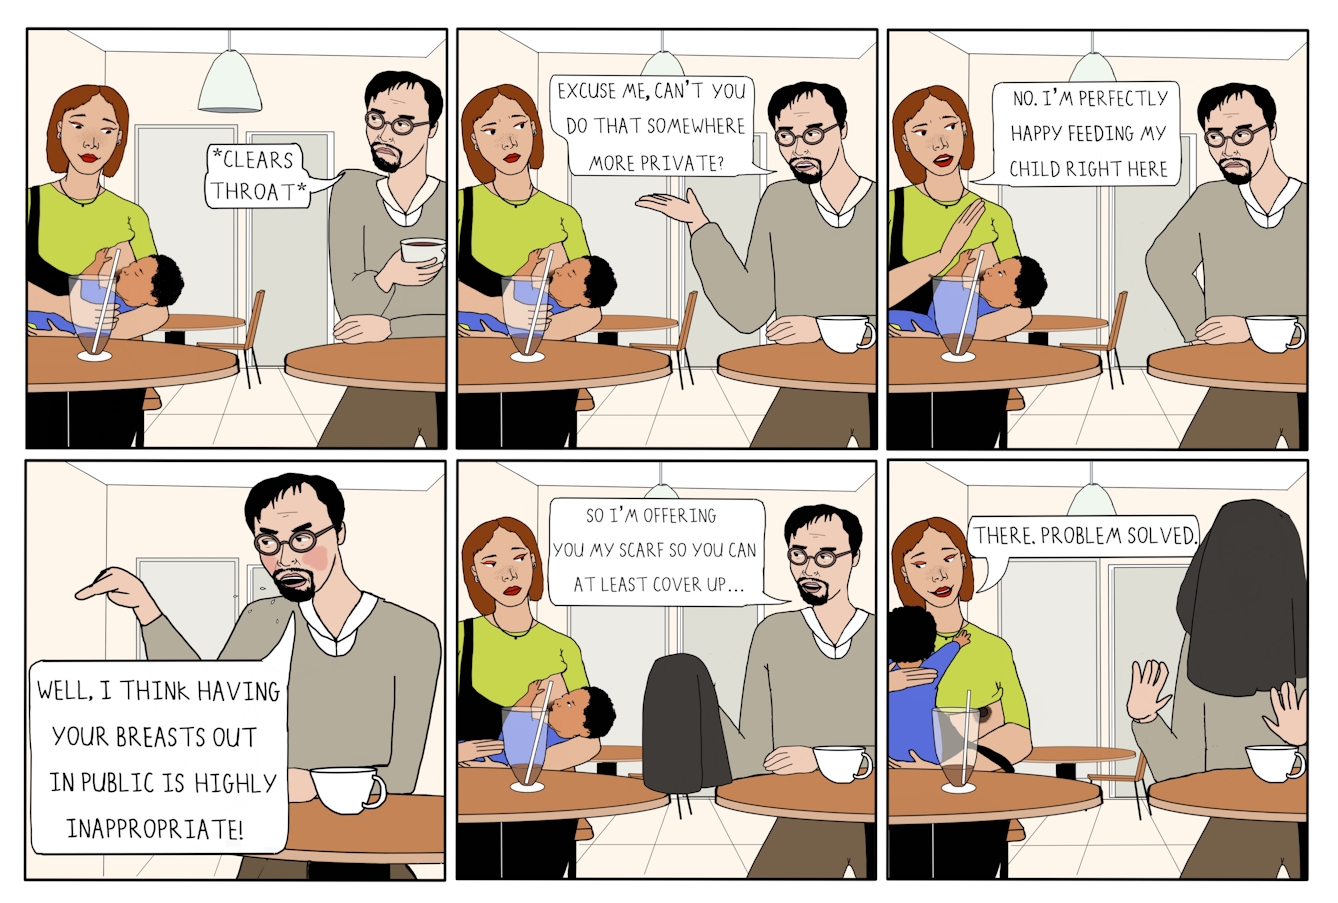 Six panel colour comic strip in a grid of 3 panels wide by 2 panels high.

The first panel shows a woman sitting at a table in a cafe. A man is sitting at a table close by. She is holding her baby and breastfeeding them. The baby’s eyes are closed. She is looking down at her baby attentively, and her green t-shirt is pulled up, showing her breast. The man, who is holding a drink, is looking over at the woman in disgust. A speech bubble from him reads ‘*Clears throat*’. 

The second panel shows the same characters sitting in the cafe. The woman is looking over at the man. She continues to breastfeed her baby. The man is looking at the woman in contempt, his right arm gesturing animatedly. A speech bubble from him reads ‘Excuse me, can’t you do that somewhere more private?’ 

The third panel shows the same characters. The woman is breastfeeding her baby and looking over at the man, with her right arm raised in his direction. She is holding the baby in her left arm. The baby’s eyes are open and they are looking up at the mother whilst continuing to breastfeed. The man is looking at the woman in contempt, with one hand on his hip. A speech bubble from the woman reads ‘No. I’m perfectly happy feeding my child right here’. 

The fourth panel shows the man sitting at his table. He is red in the face and looks angry and flustered. His mouth is open and spit droplets are shown flying out of his mouth. His right arm is raised and he is pointing a finger in the direction of the woman. A speech bubble from him reads ‘Well, I think having your breasts out in public is highly inappropriate!’ 

The fifth panel shows the man, woman and baby. The woman is breastfeeding the baby and looking over at the man. The man is speaking to the woman, and is holding up a black scarf in his right hand. A speech bubble from him reads ‘So I’m offering you my scarf so you can at least cover up…’ 

The sixth panel shows the same characters. The black scarf is positioned over the man’s head, covering his face and blocking his view. Both his arms are raised in exclamation. The woman is holding her baby, whose arms are outstretched towards their mother. The woman’s breast and nipple are visible. She is looking down at her baby and smiling. A speech bubble from her reads ‘There. Problem solved.’